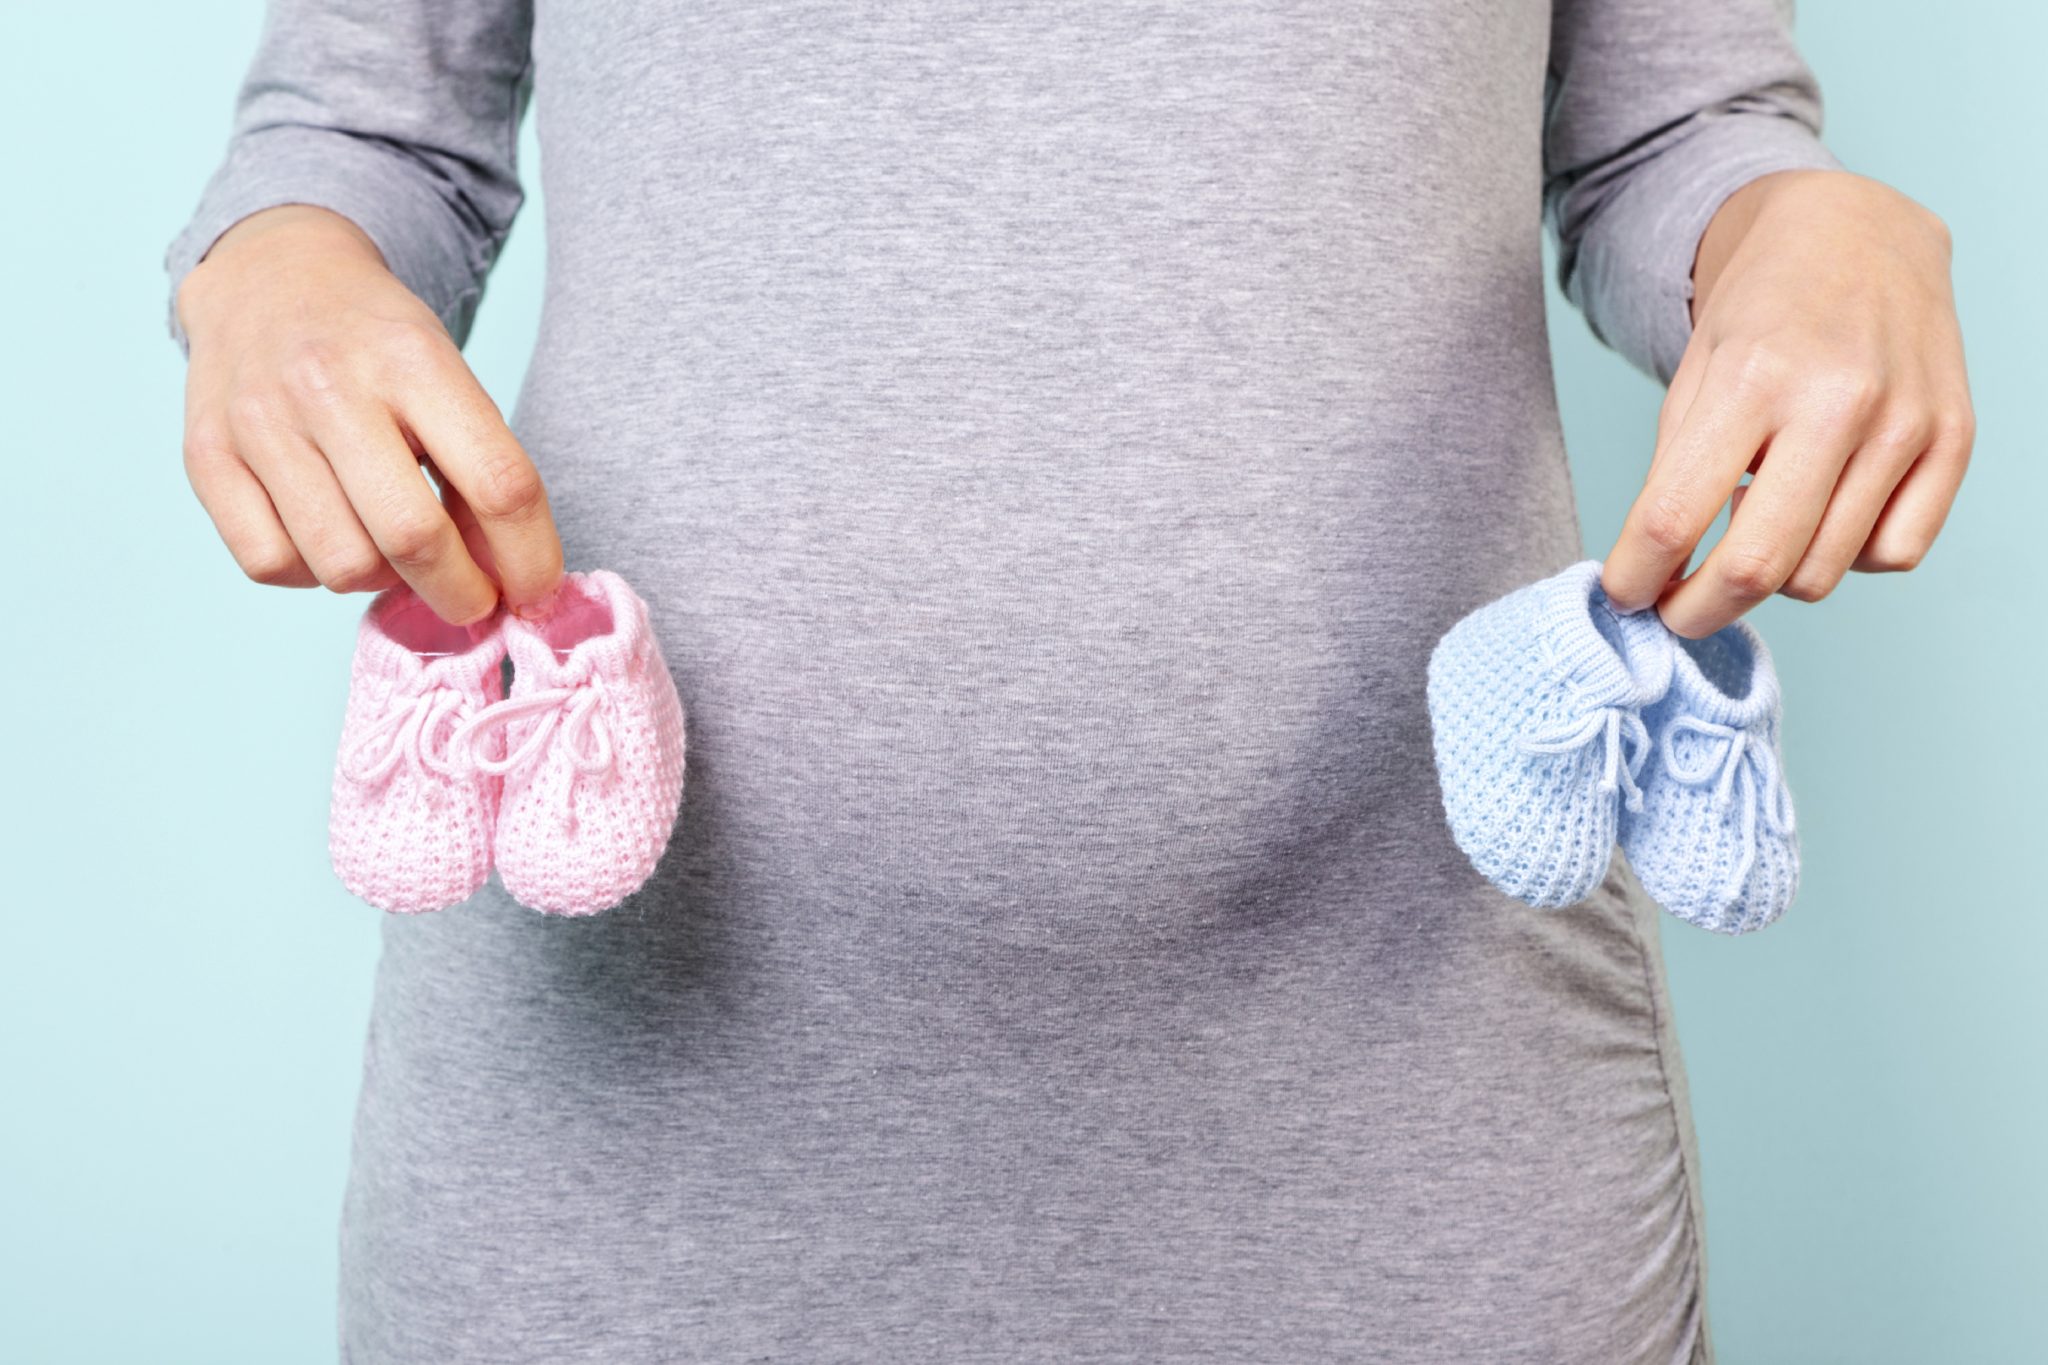 Research suggests that stress during pregnancy can impact your baby’s gender